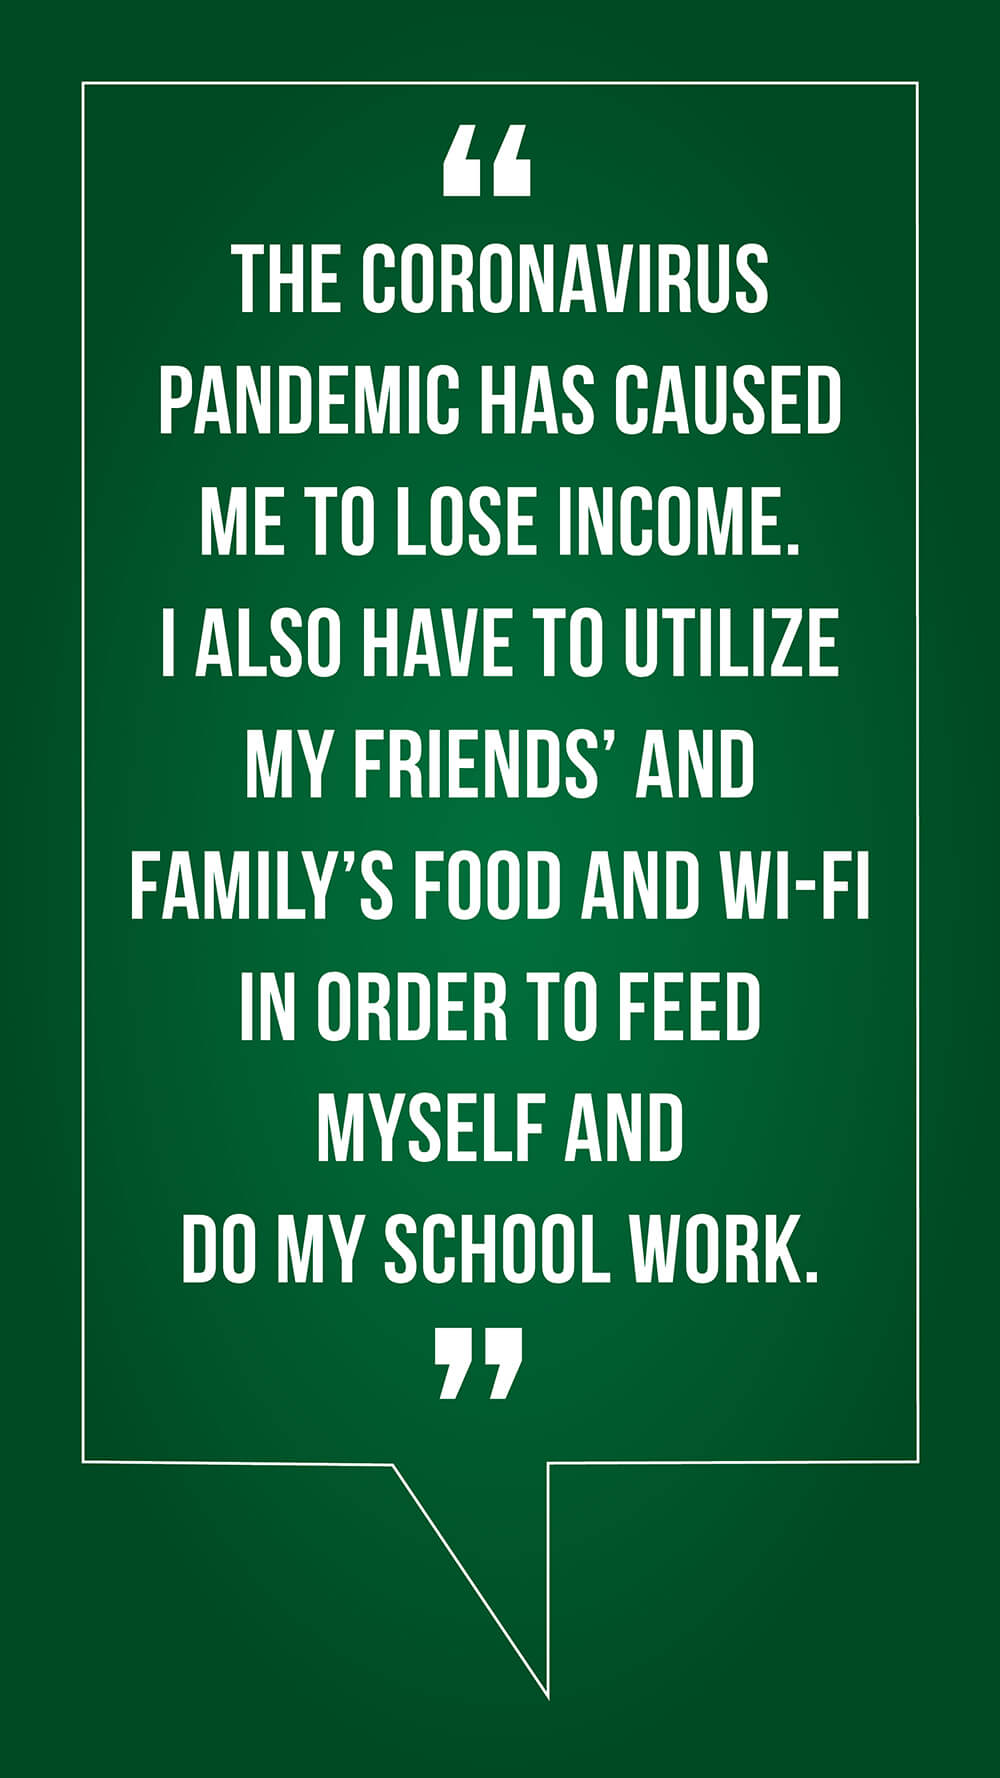 "The coronavirus pandemic has caused me to lose income. I also have to utilize my friends' and family's food and wi-fi in order to feed myself and do my school work."